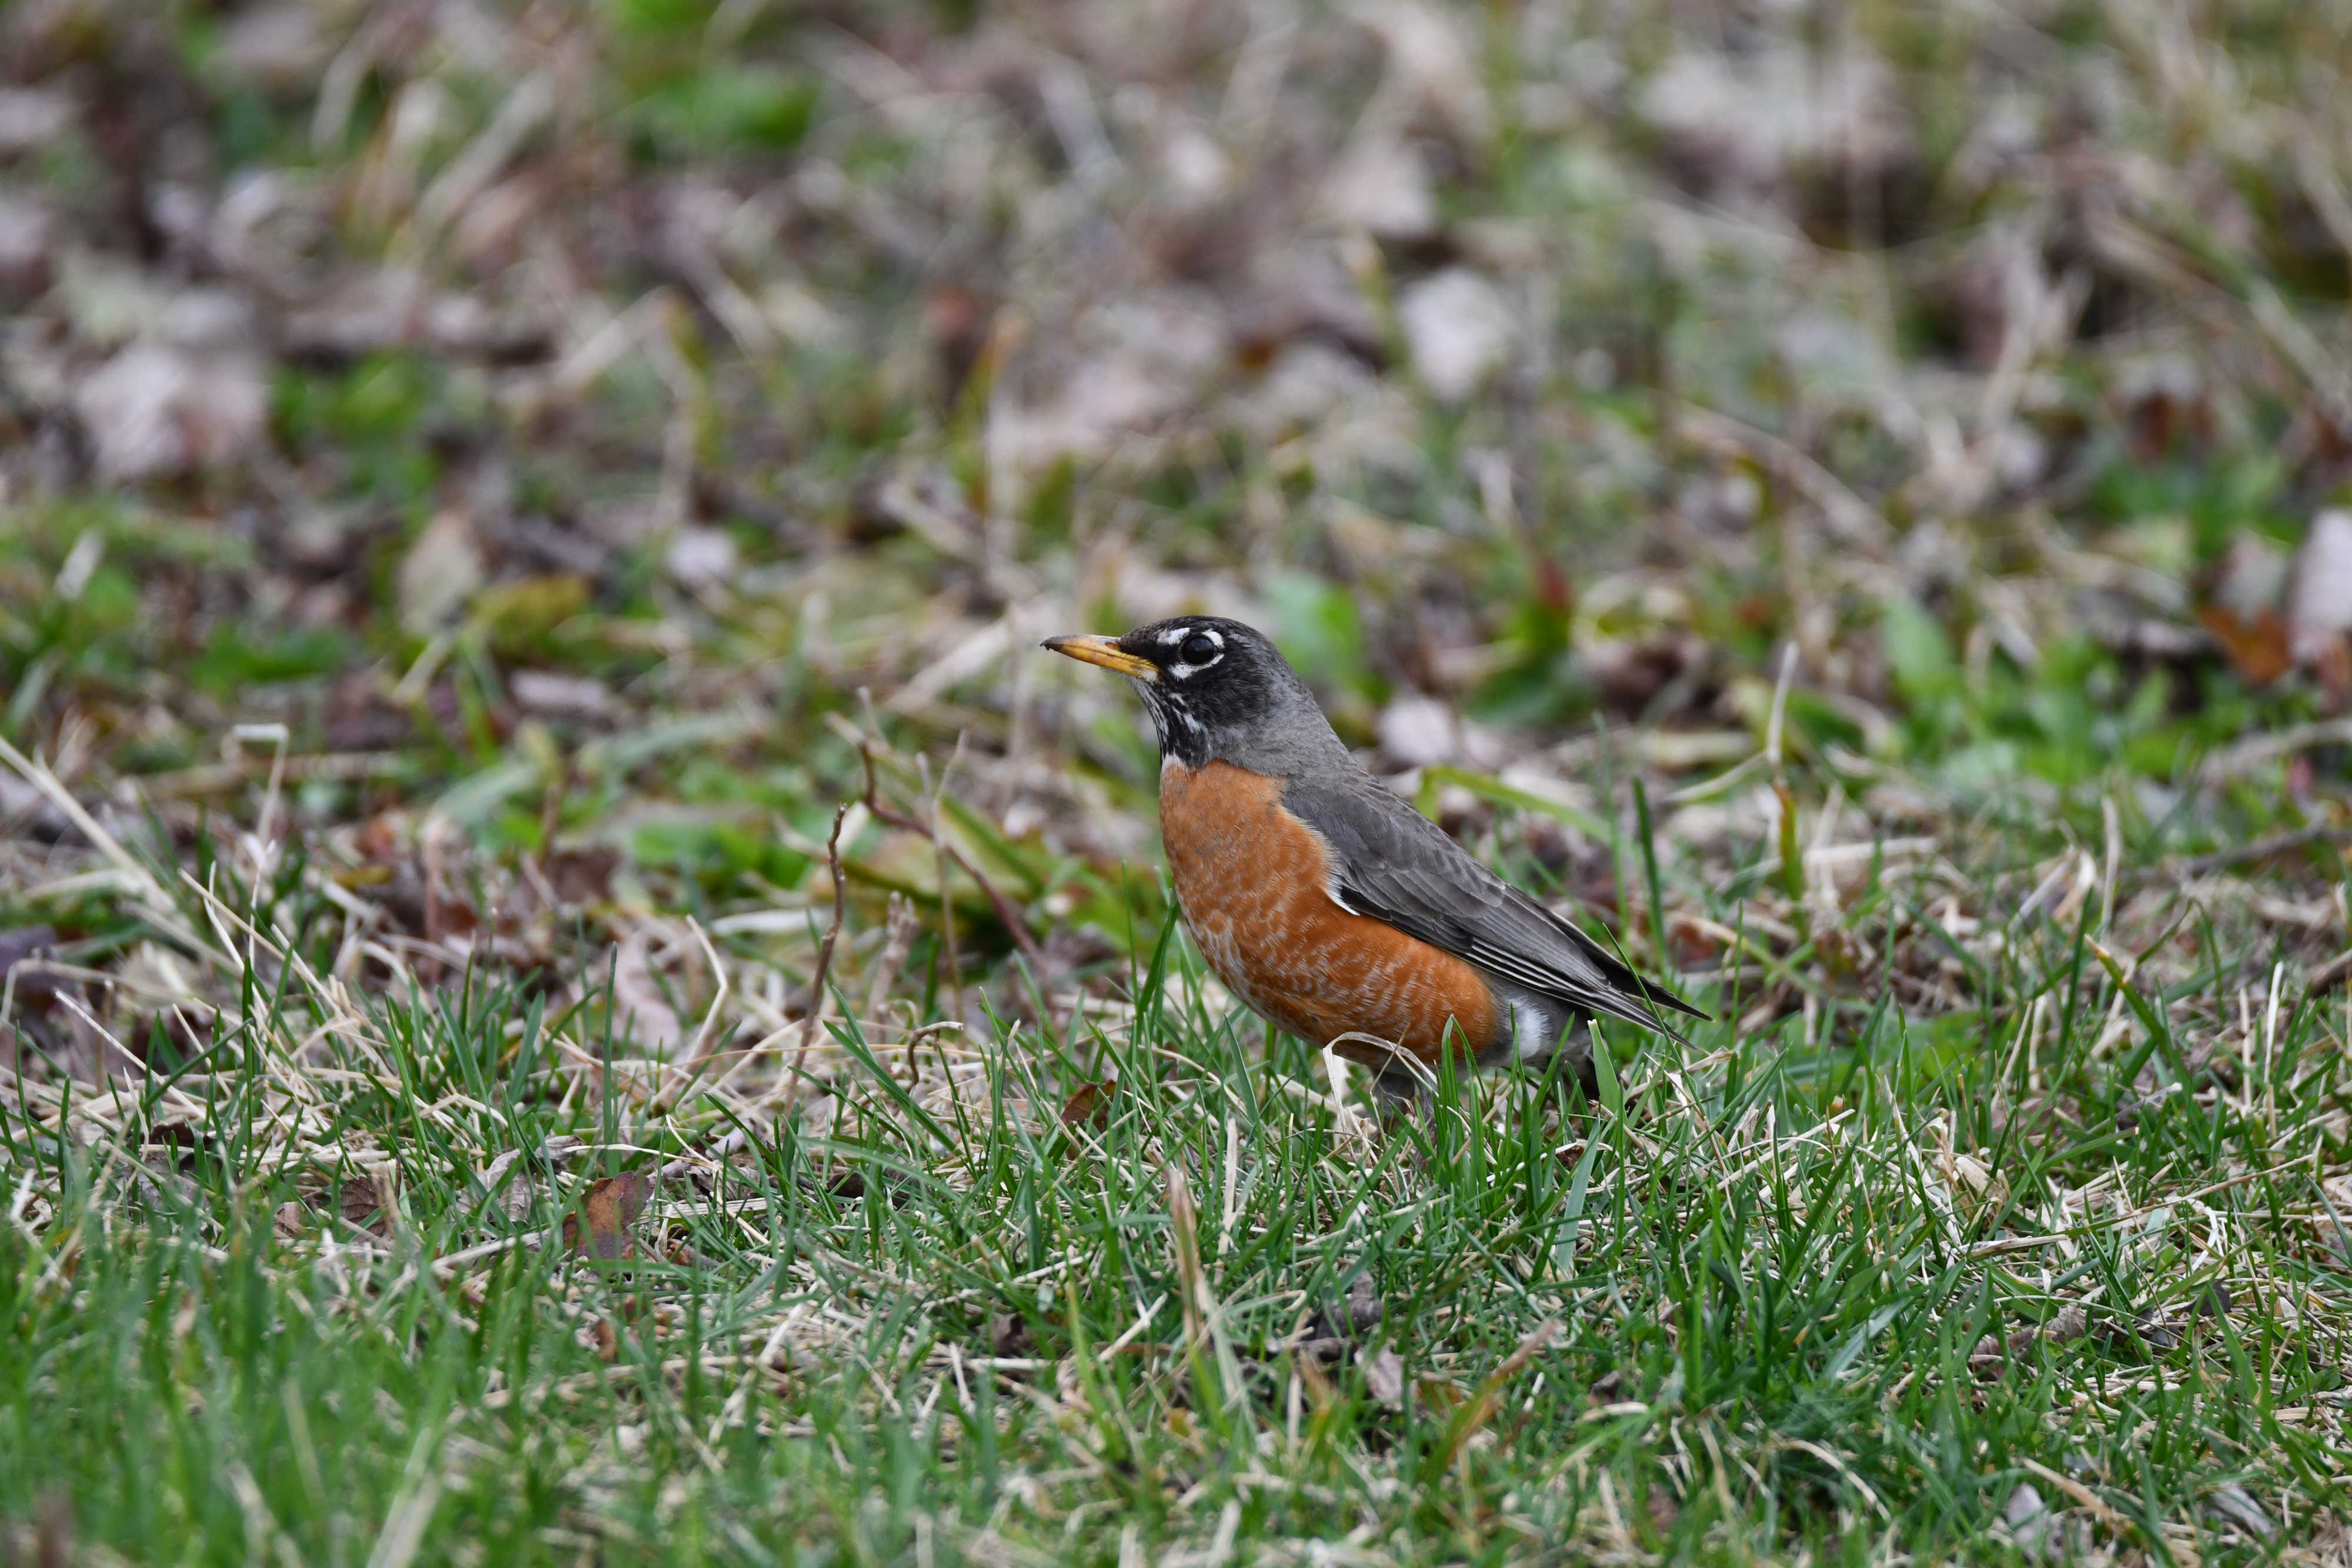 An American robin on the ground.